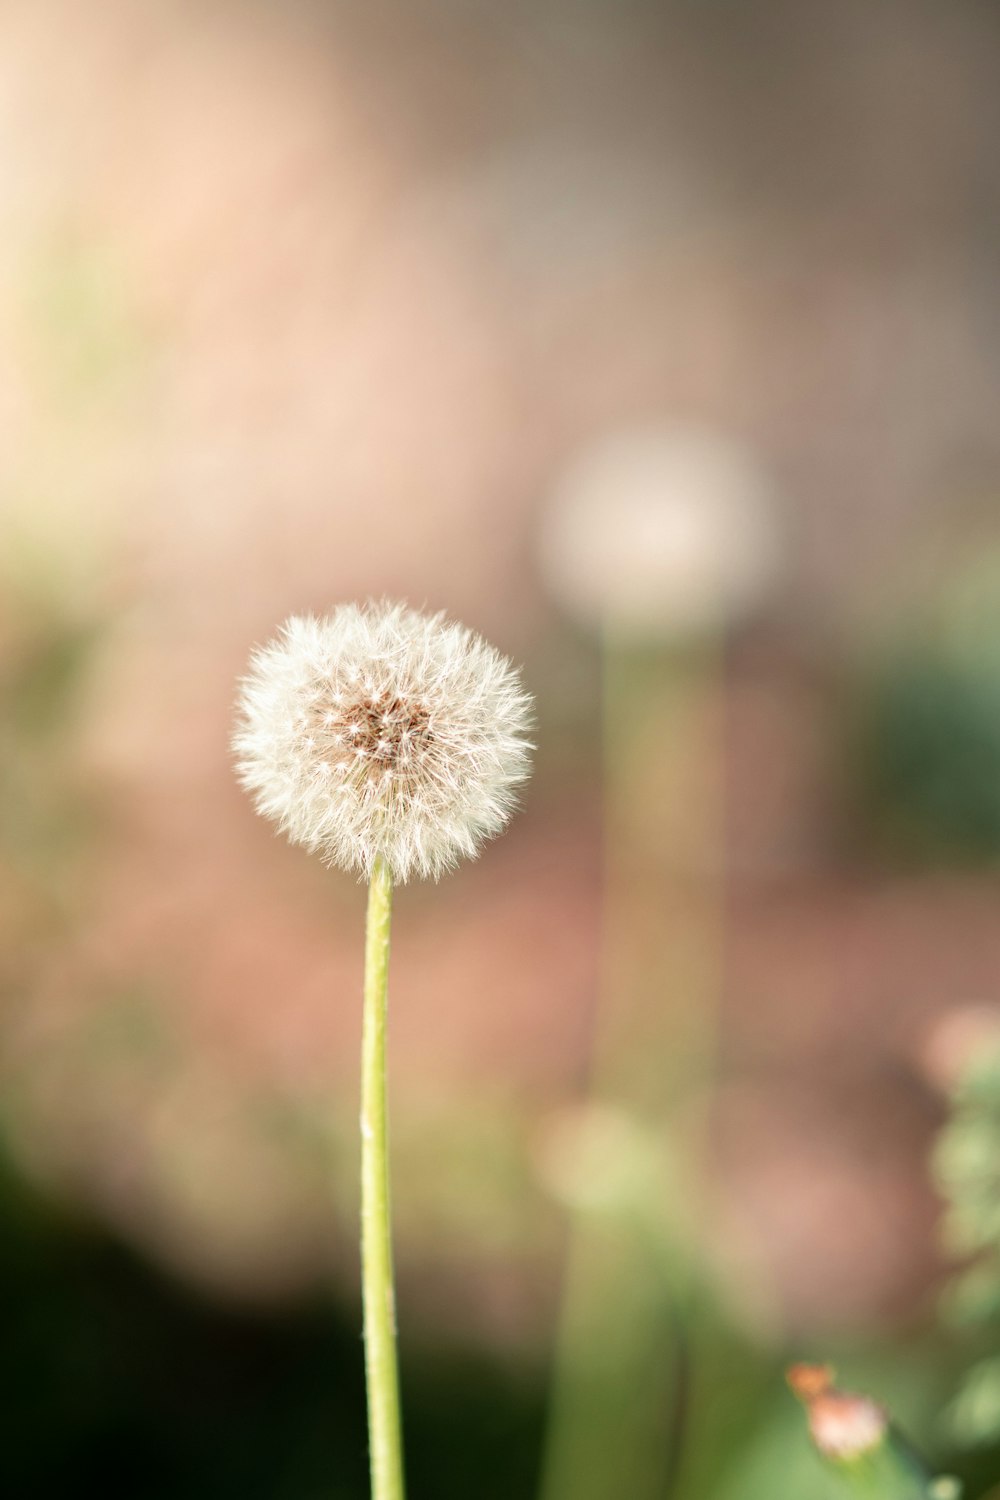 a close up of a dandelion with blurry background